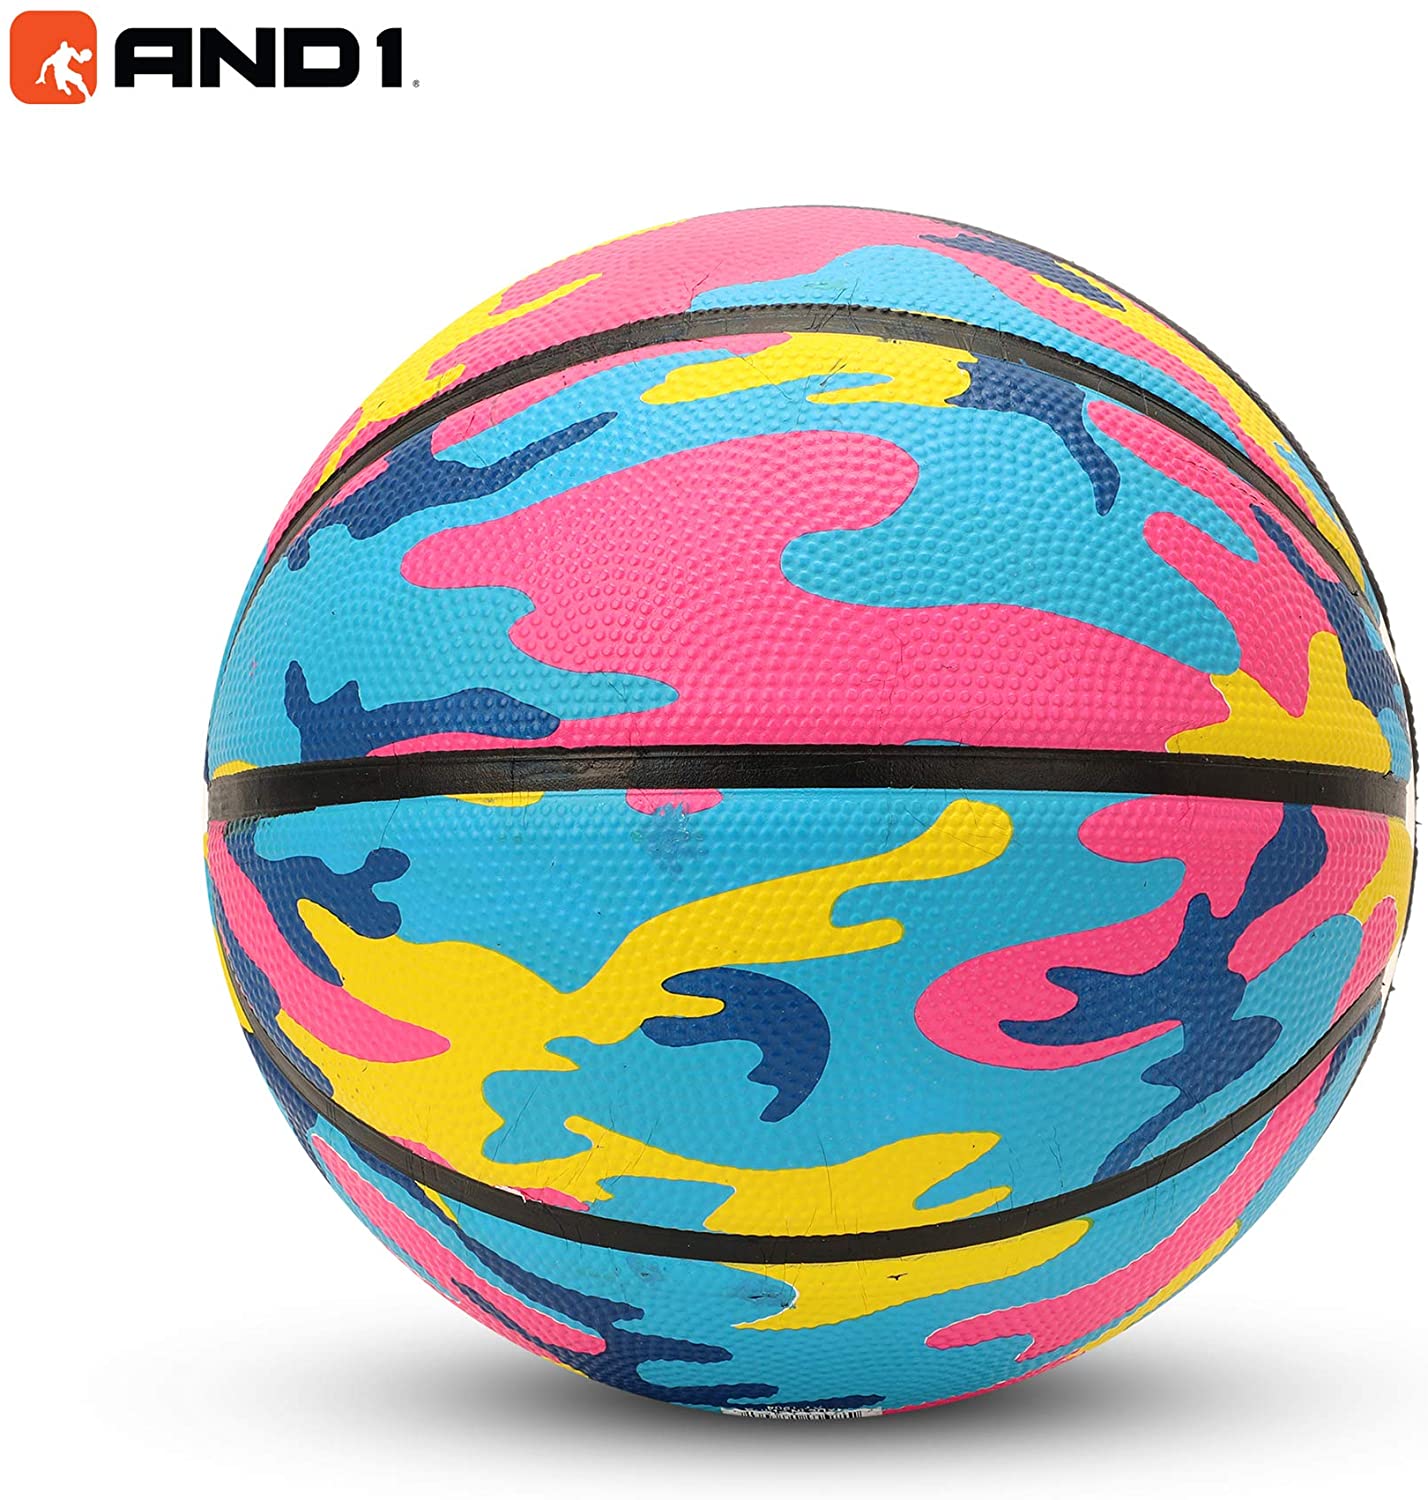 AND1 Ultra Grip Advanced Premium Rubber Basketball & Pump, Pink & Yellow, 29.5" - image 2 of 3